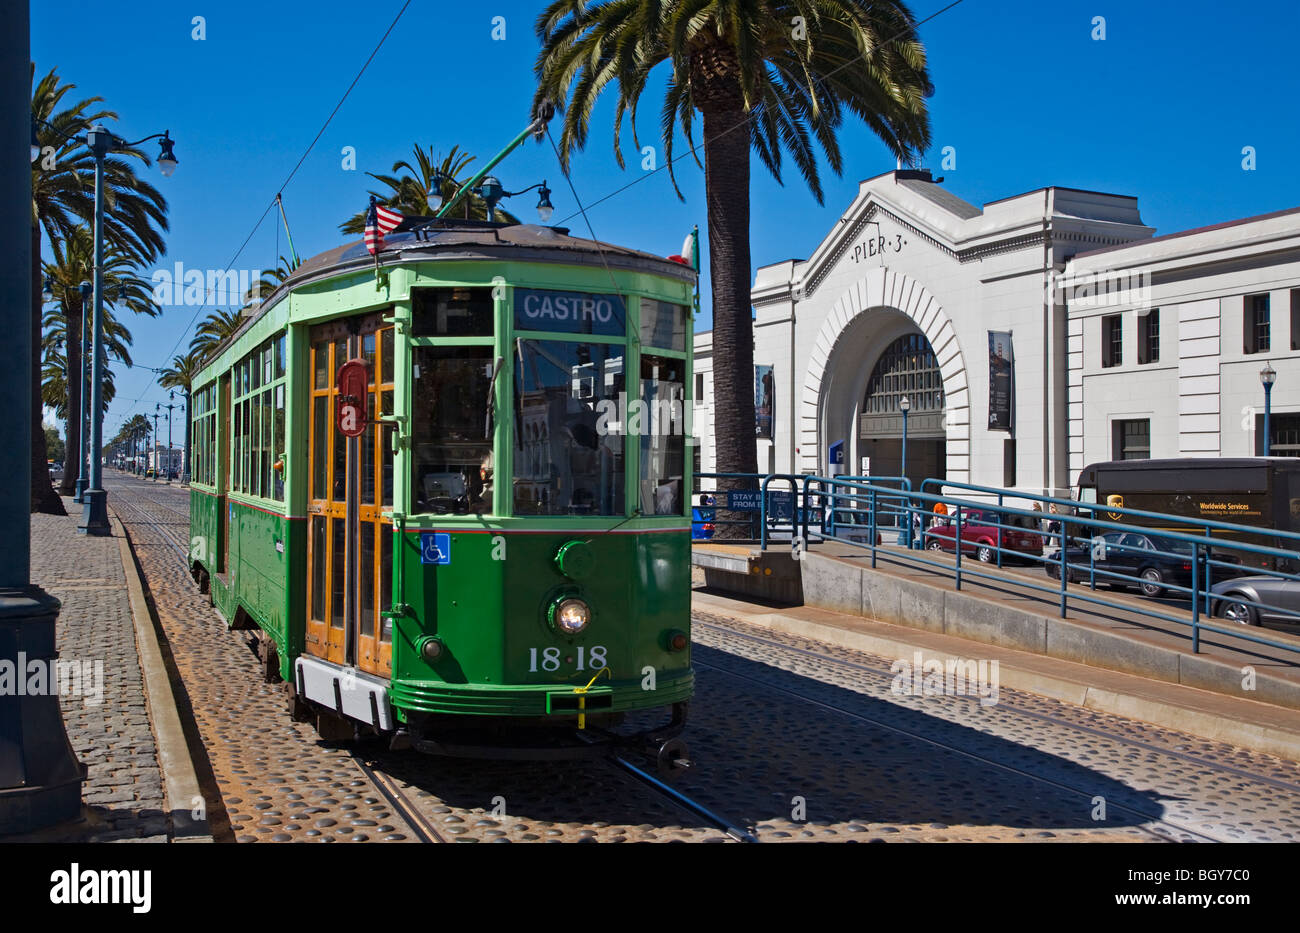 A historical CABLE CAR runs along the tracks in front of PIER 3 on THE EMBARCADERO - SAN FRANCISCO, CALIFORNIA Stock Photo